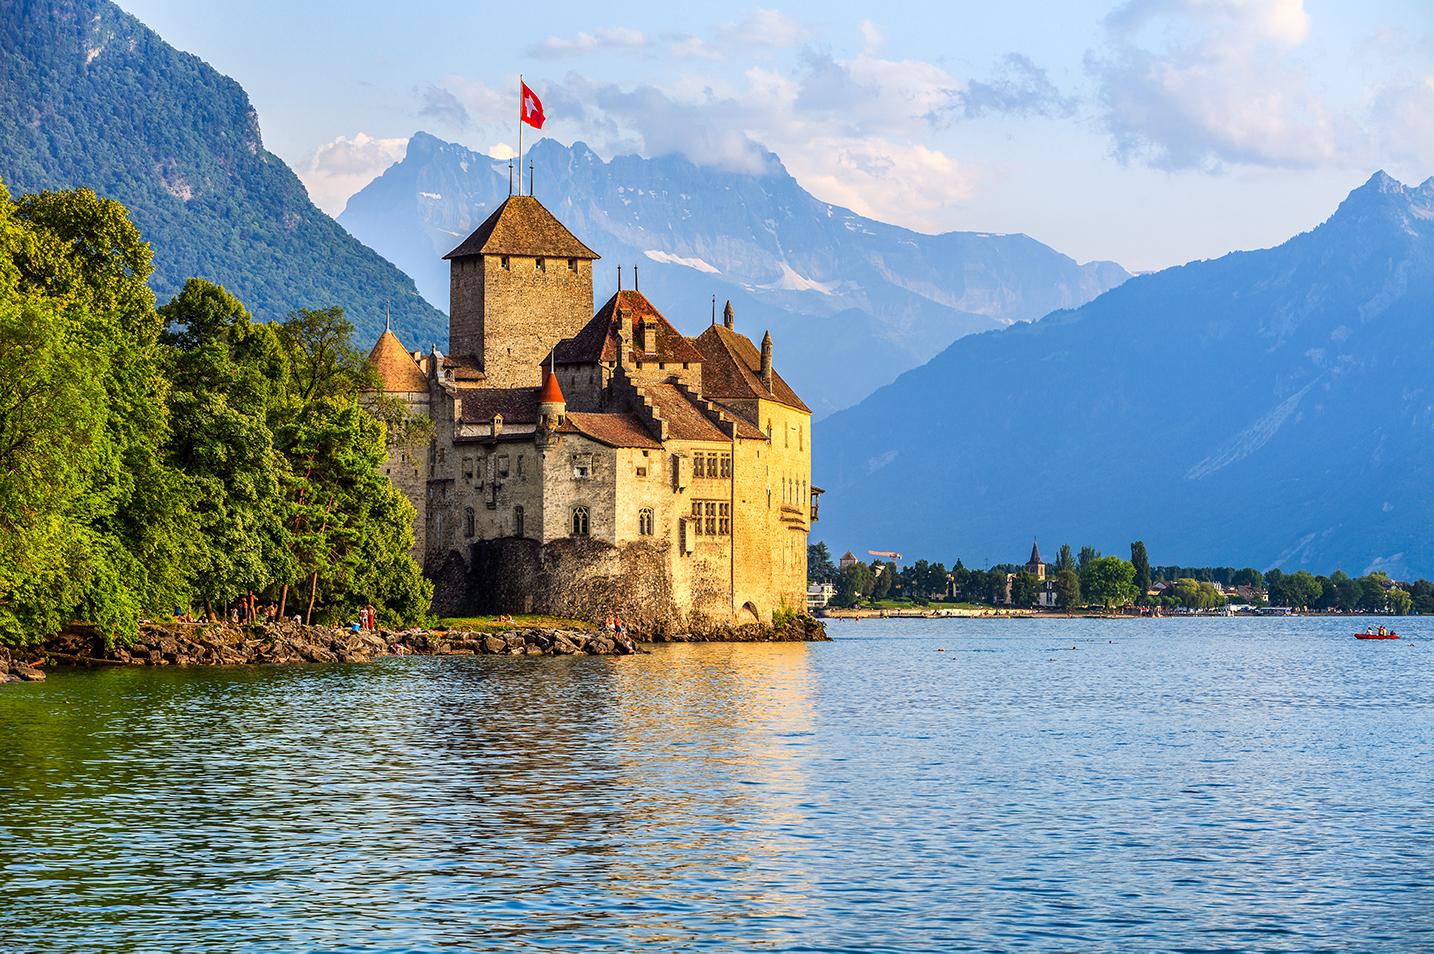 Take in views of the Swiss Alps or experience charming cities with Switzerland tours